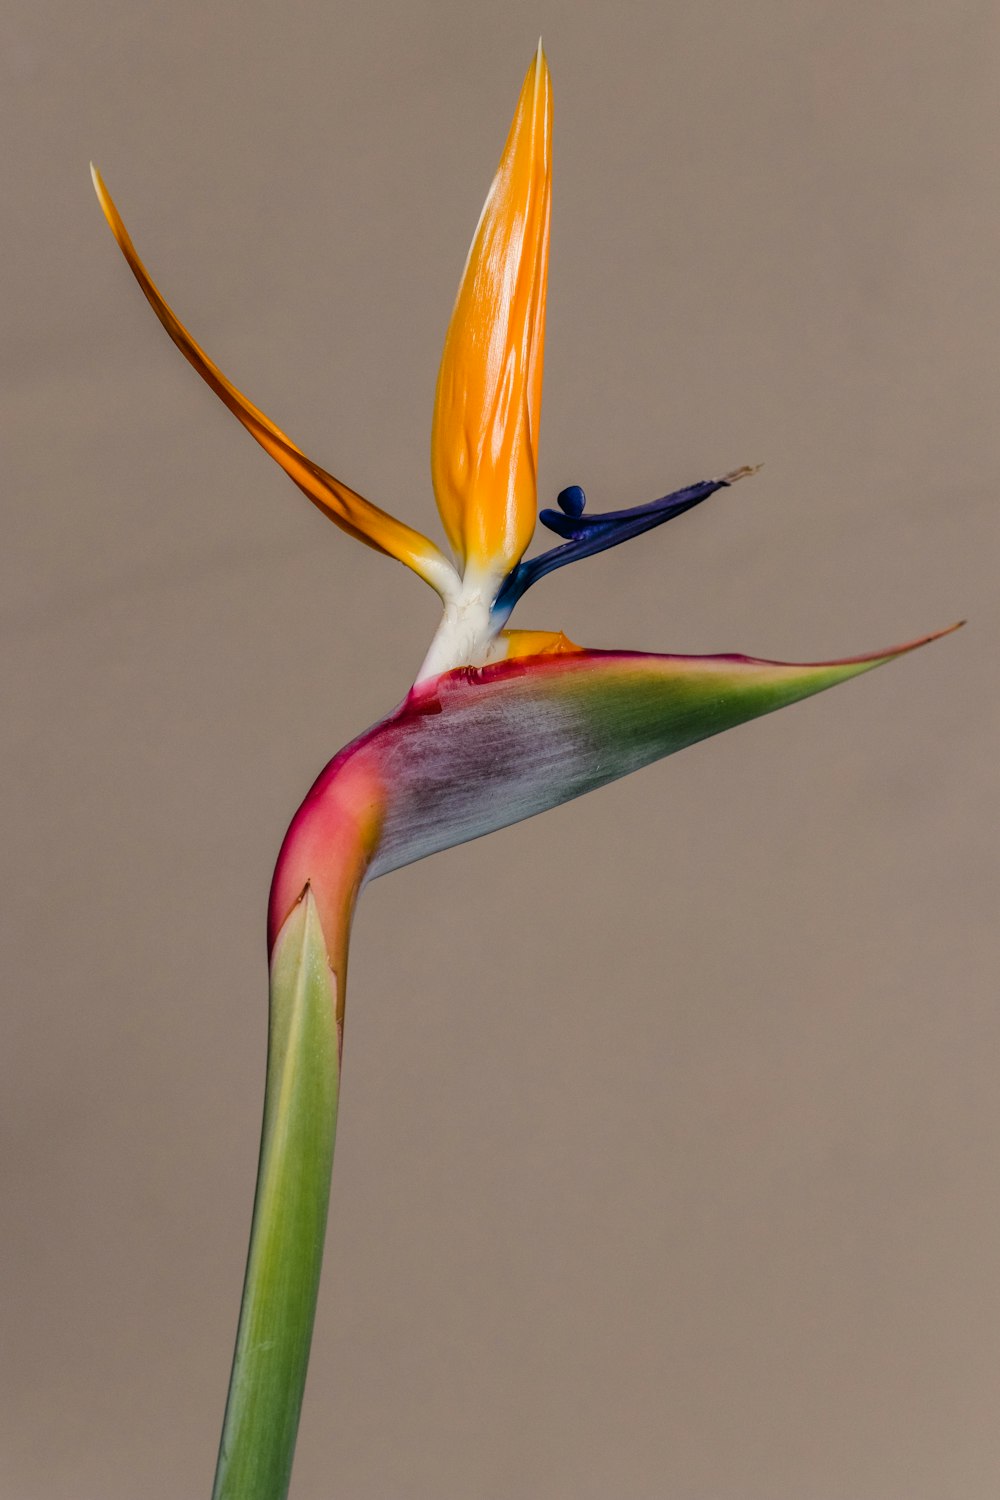 yellow and red birds of paradise in close up photography